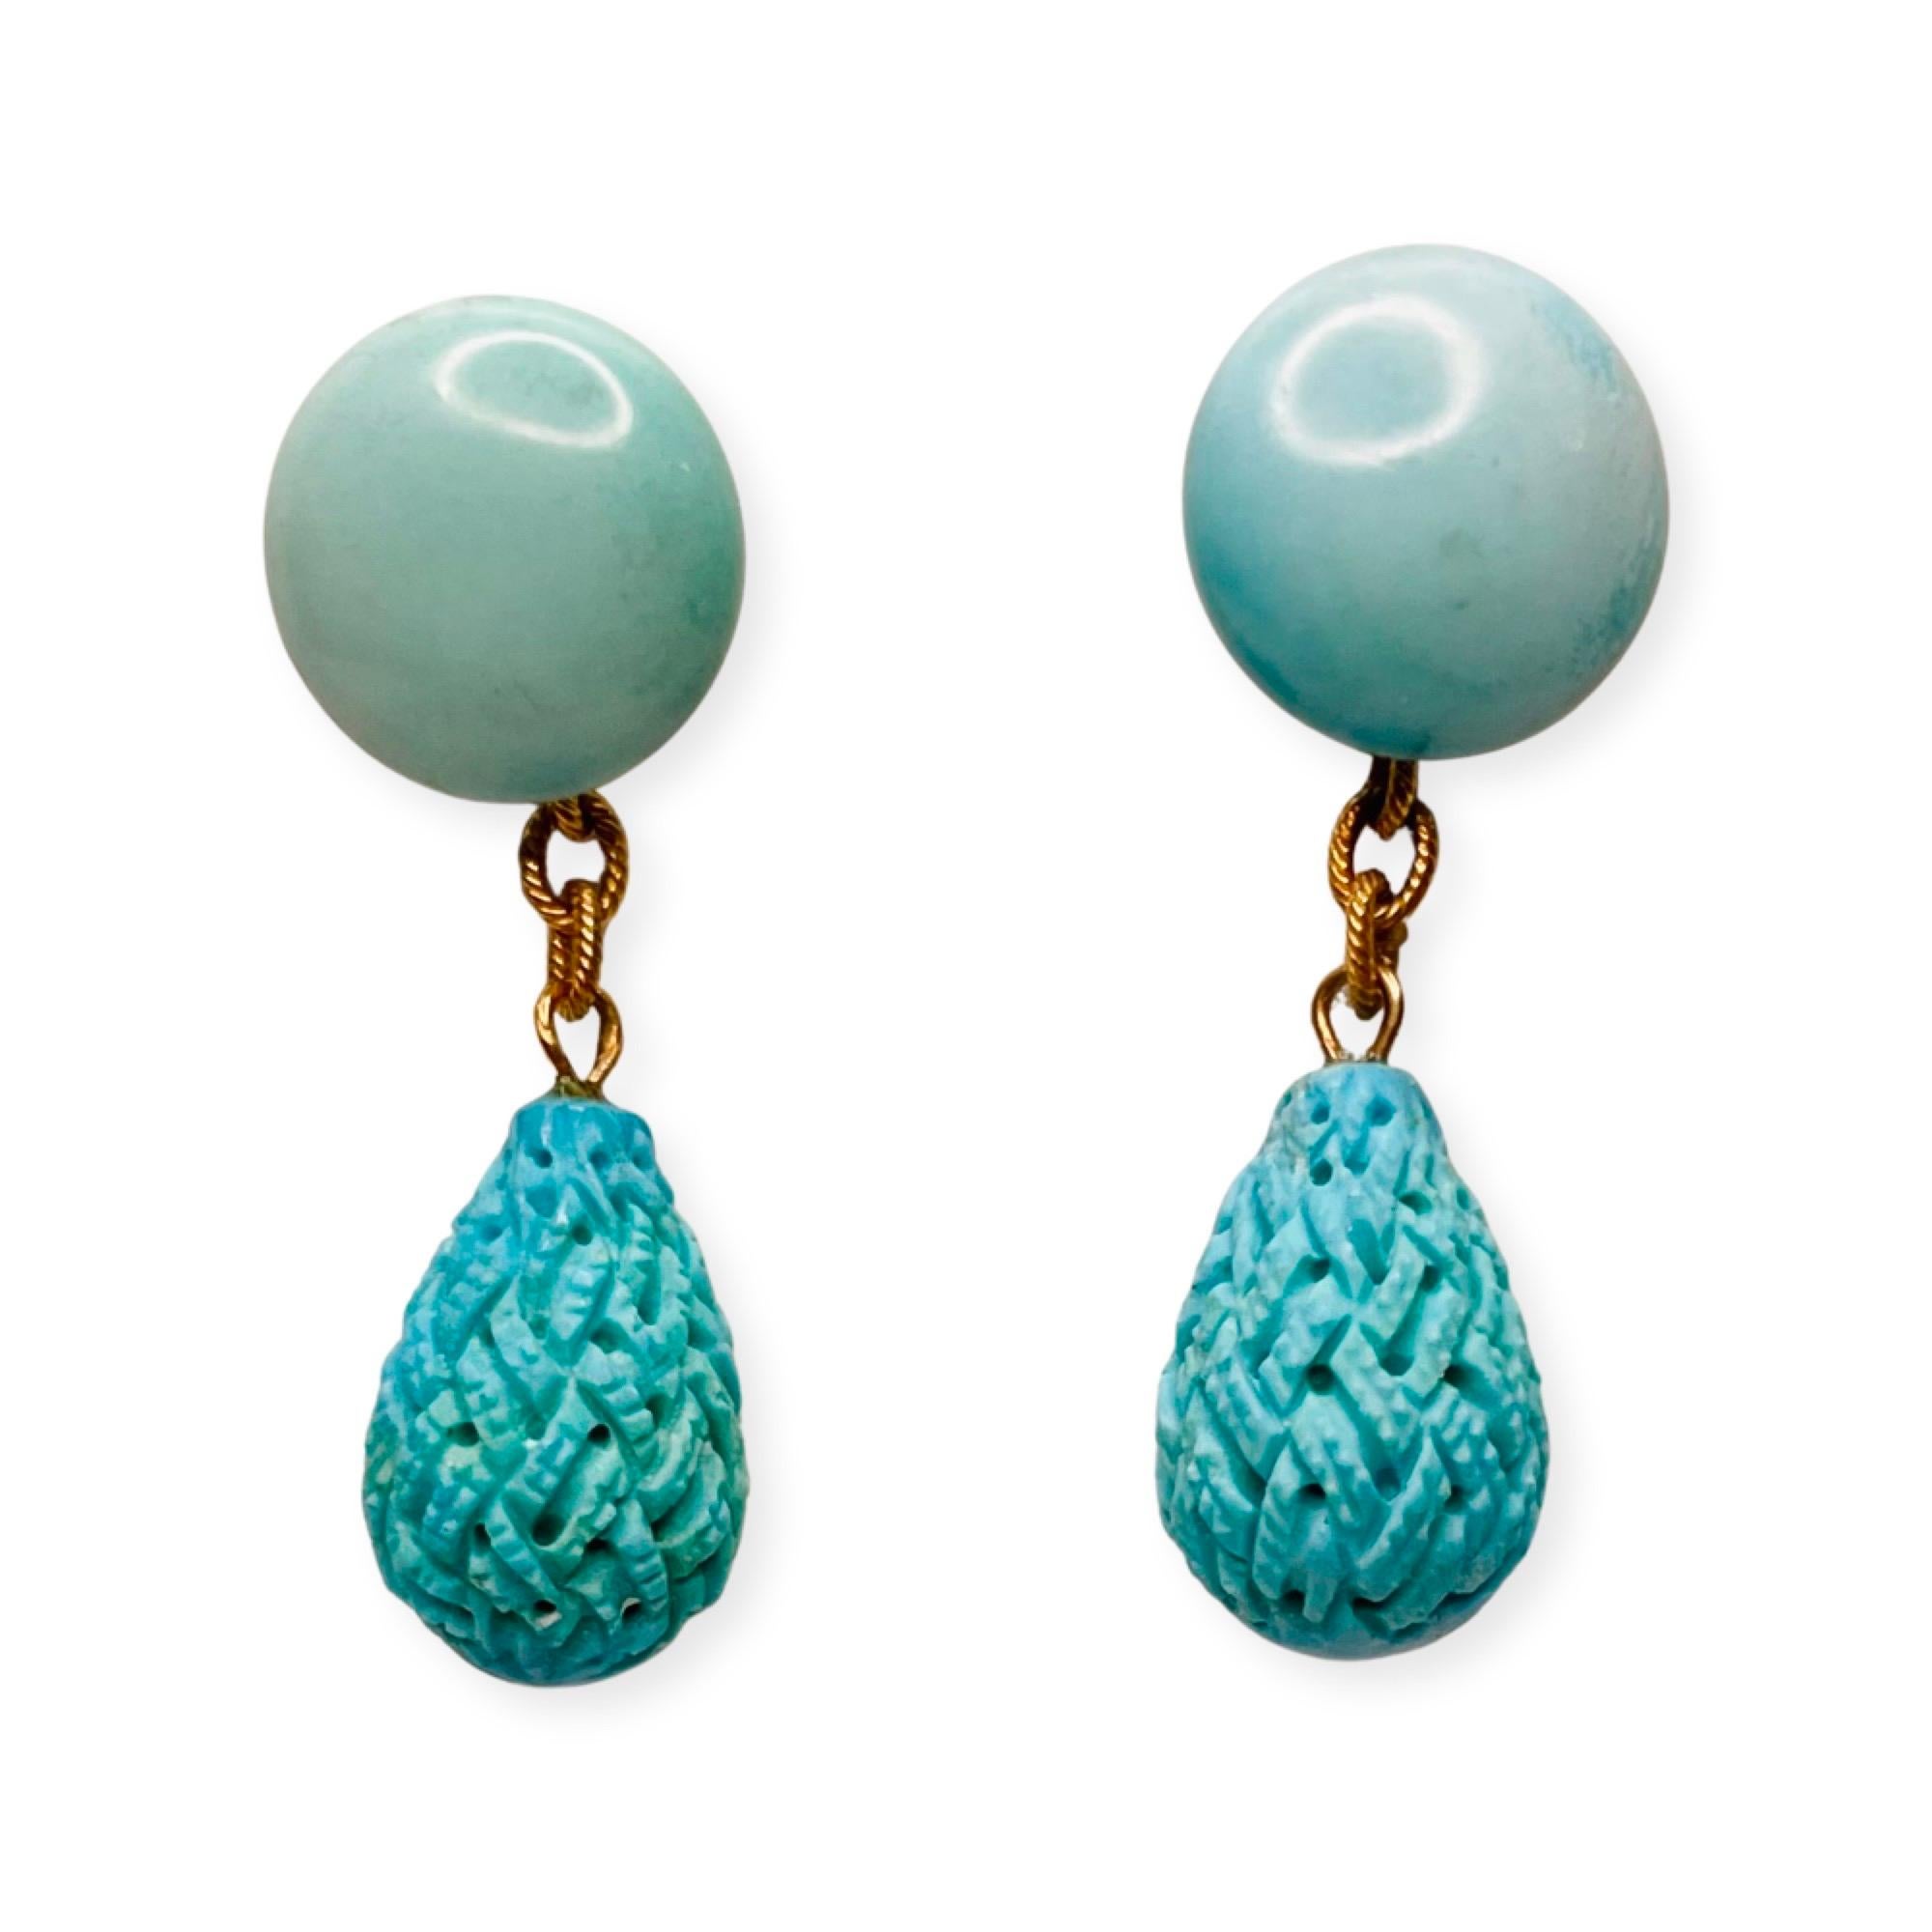 Lithos 14K & 18K Yellow Gold Turquoise Earrings. The tops are 12.0 mm disks with 14K yellow gold posts. An 18K cable chain holds the carved turquoise drops. The drops are integral-one solid piece of carved turquoise. The drops measures 15.0 mm by